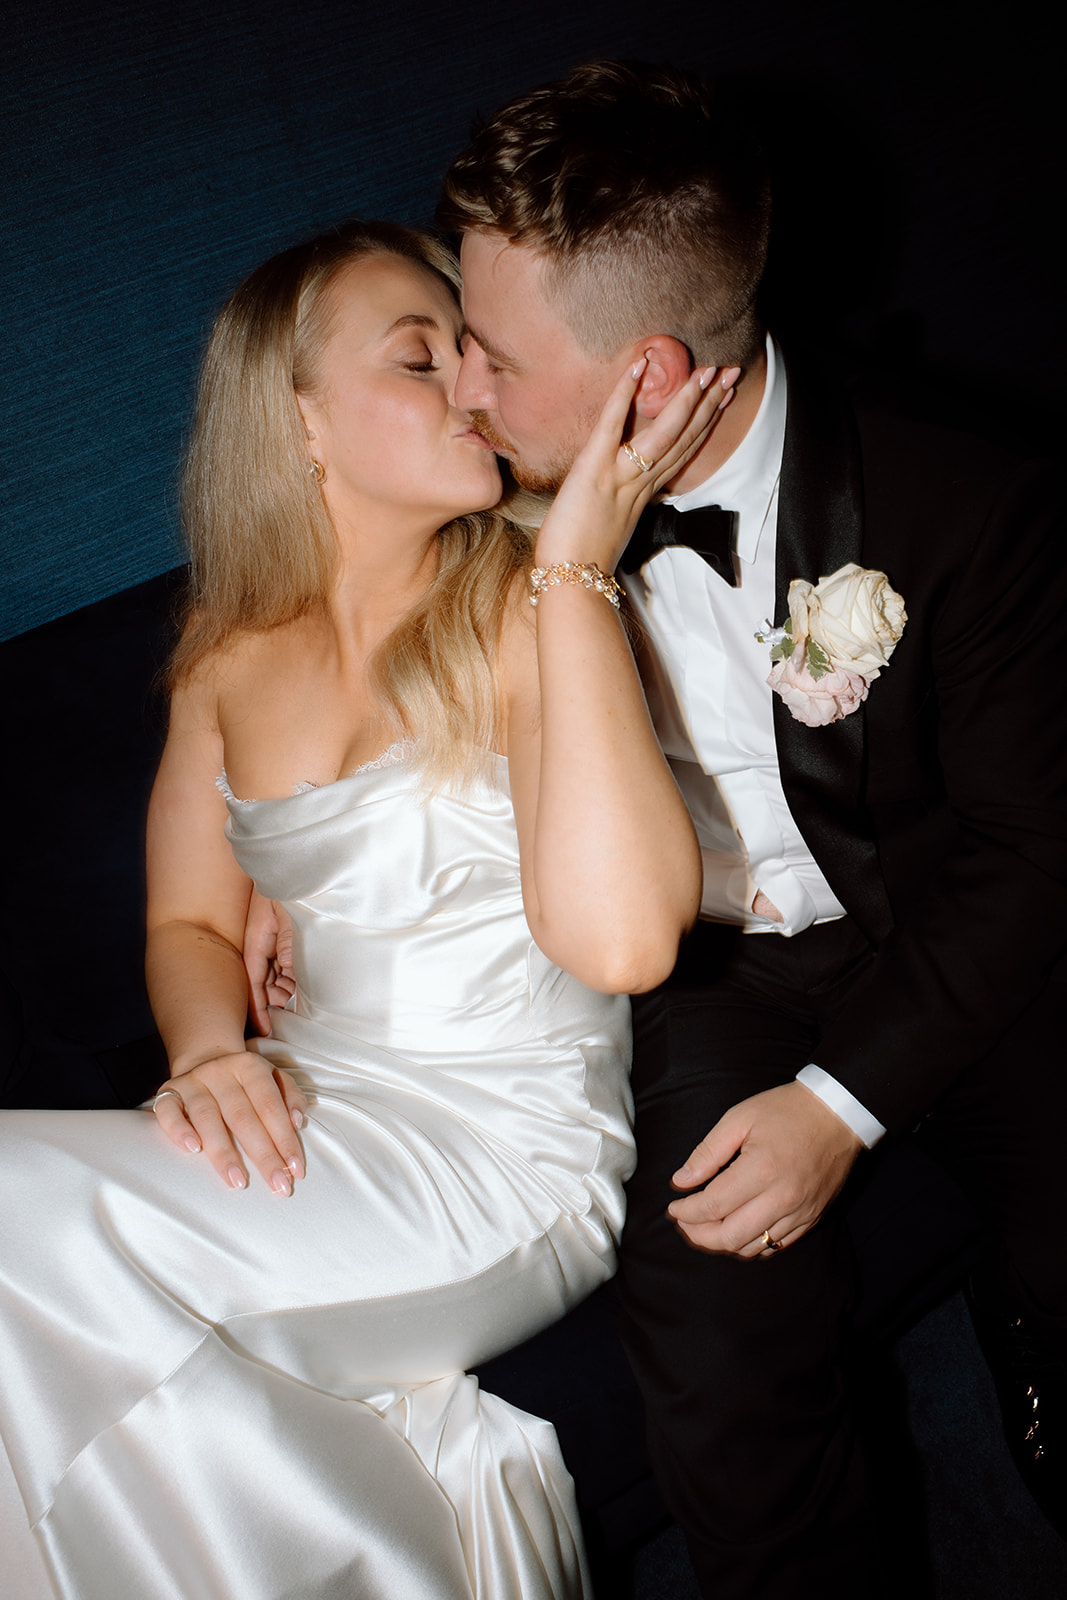 Couple after party portraits at the wedding in the Southern Highlands Bendooley Estate